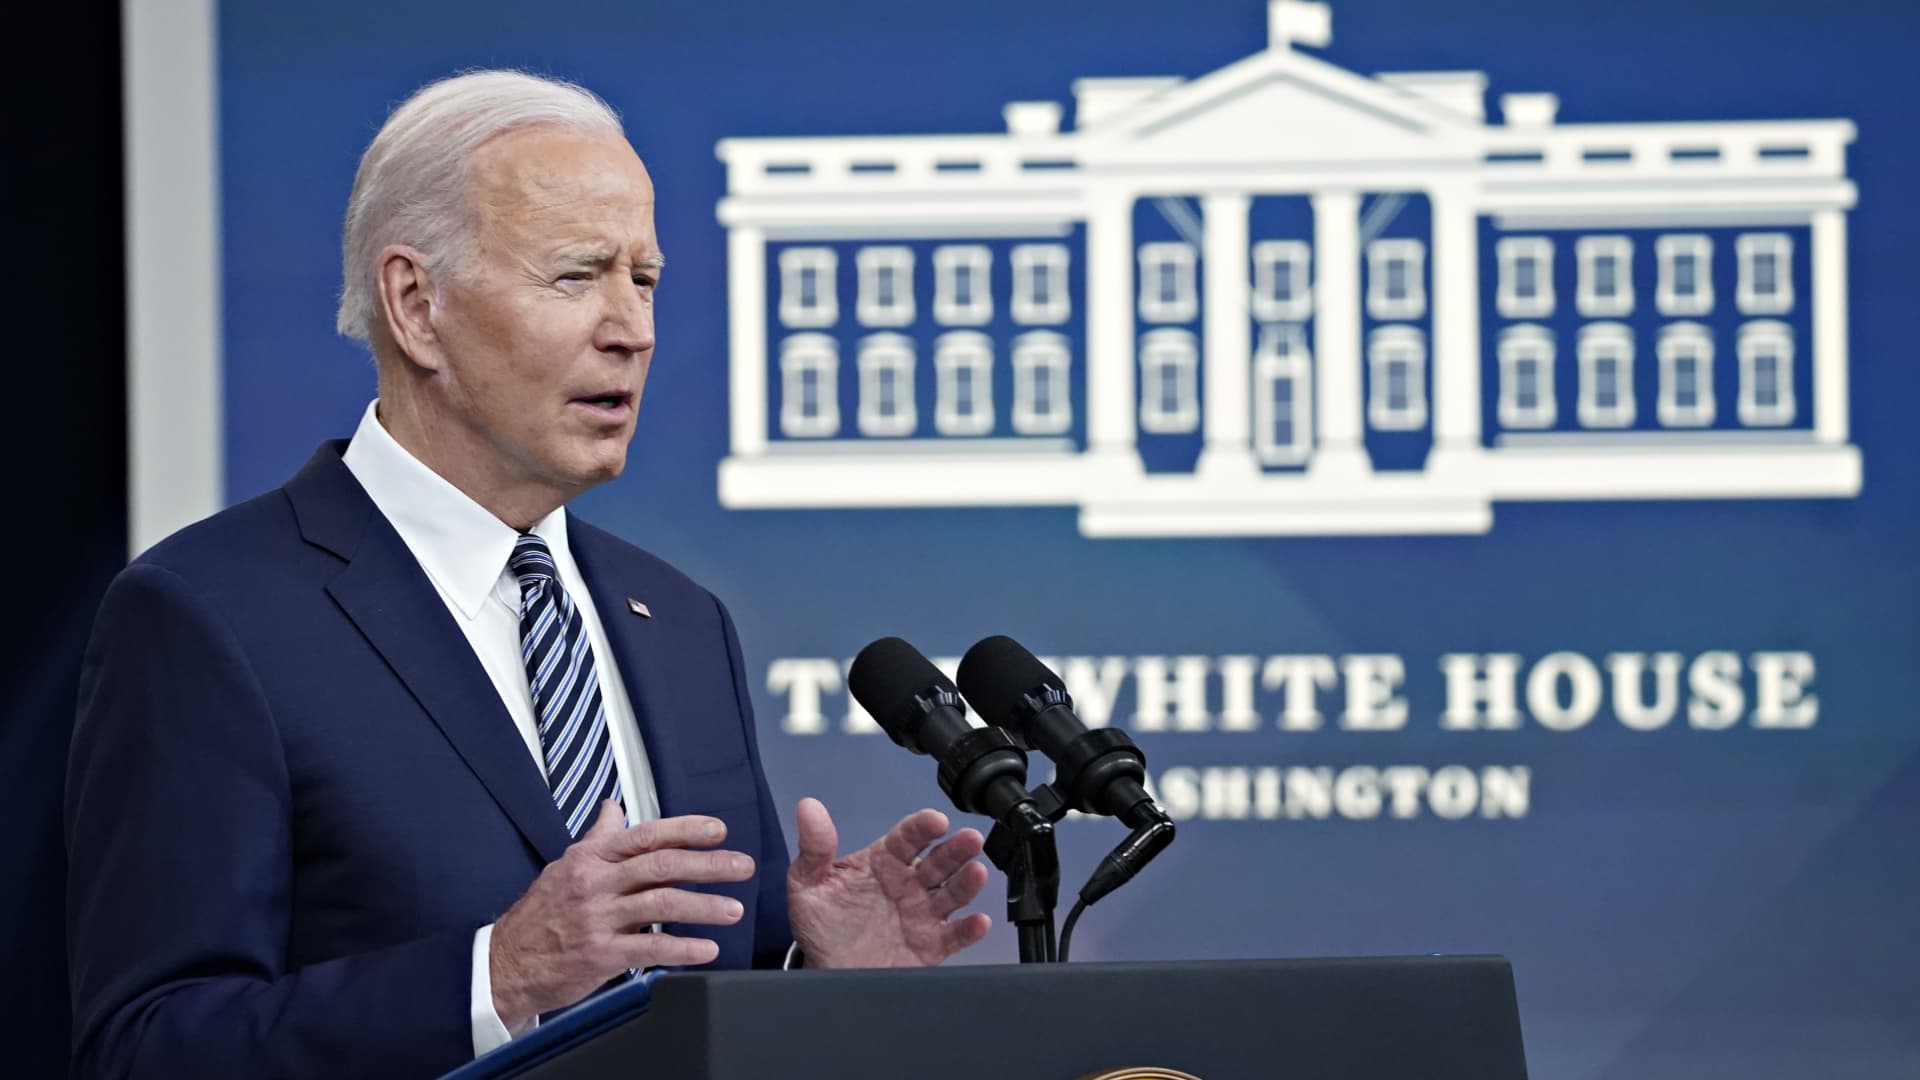 U.S. President Joe Biden speaks about reducing energy prices in the Eisenhower Executive Office Building in Washington, D.C., U.S., on Thursday, March 31, 2022.